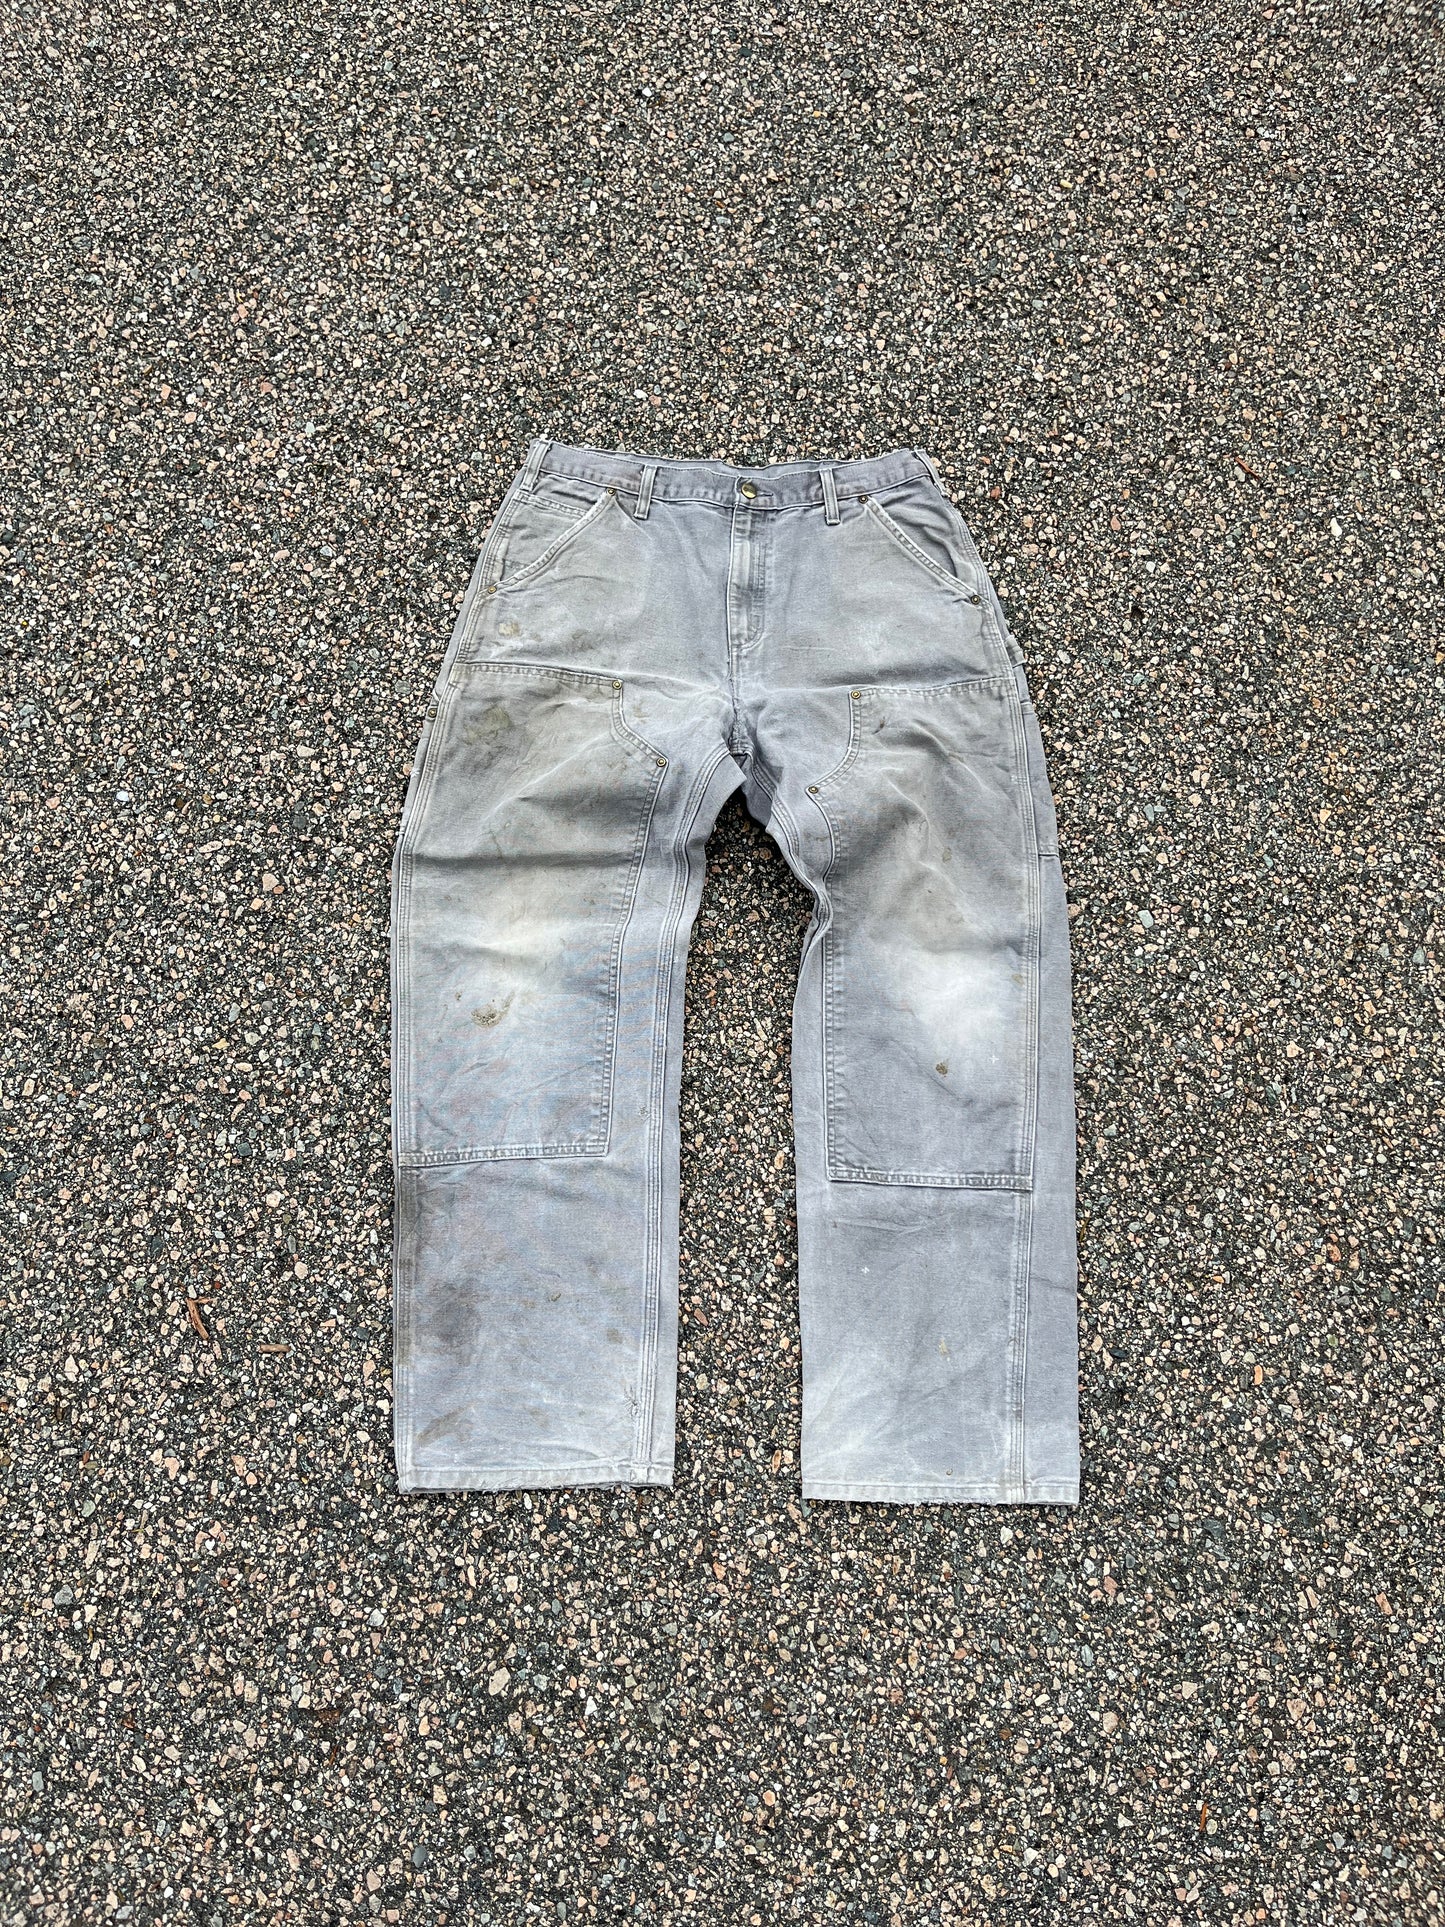 Faded Cement Grey Carhartt Double Knee Pants - 32 x 30